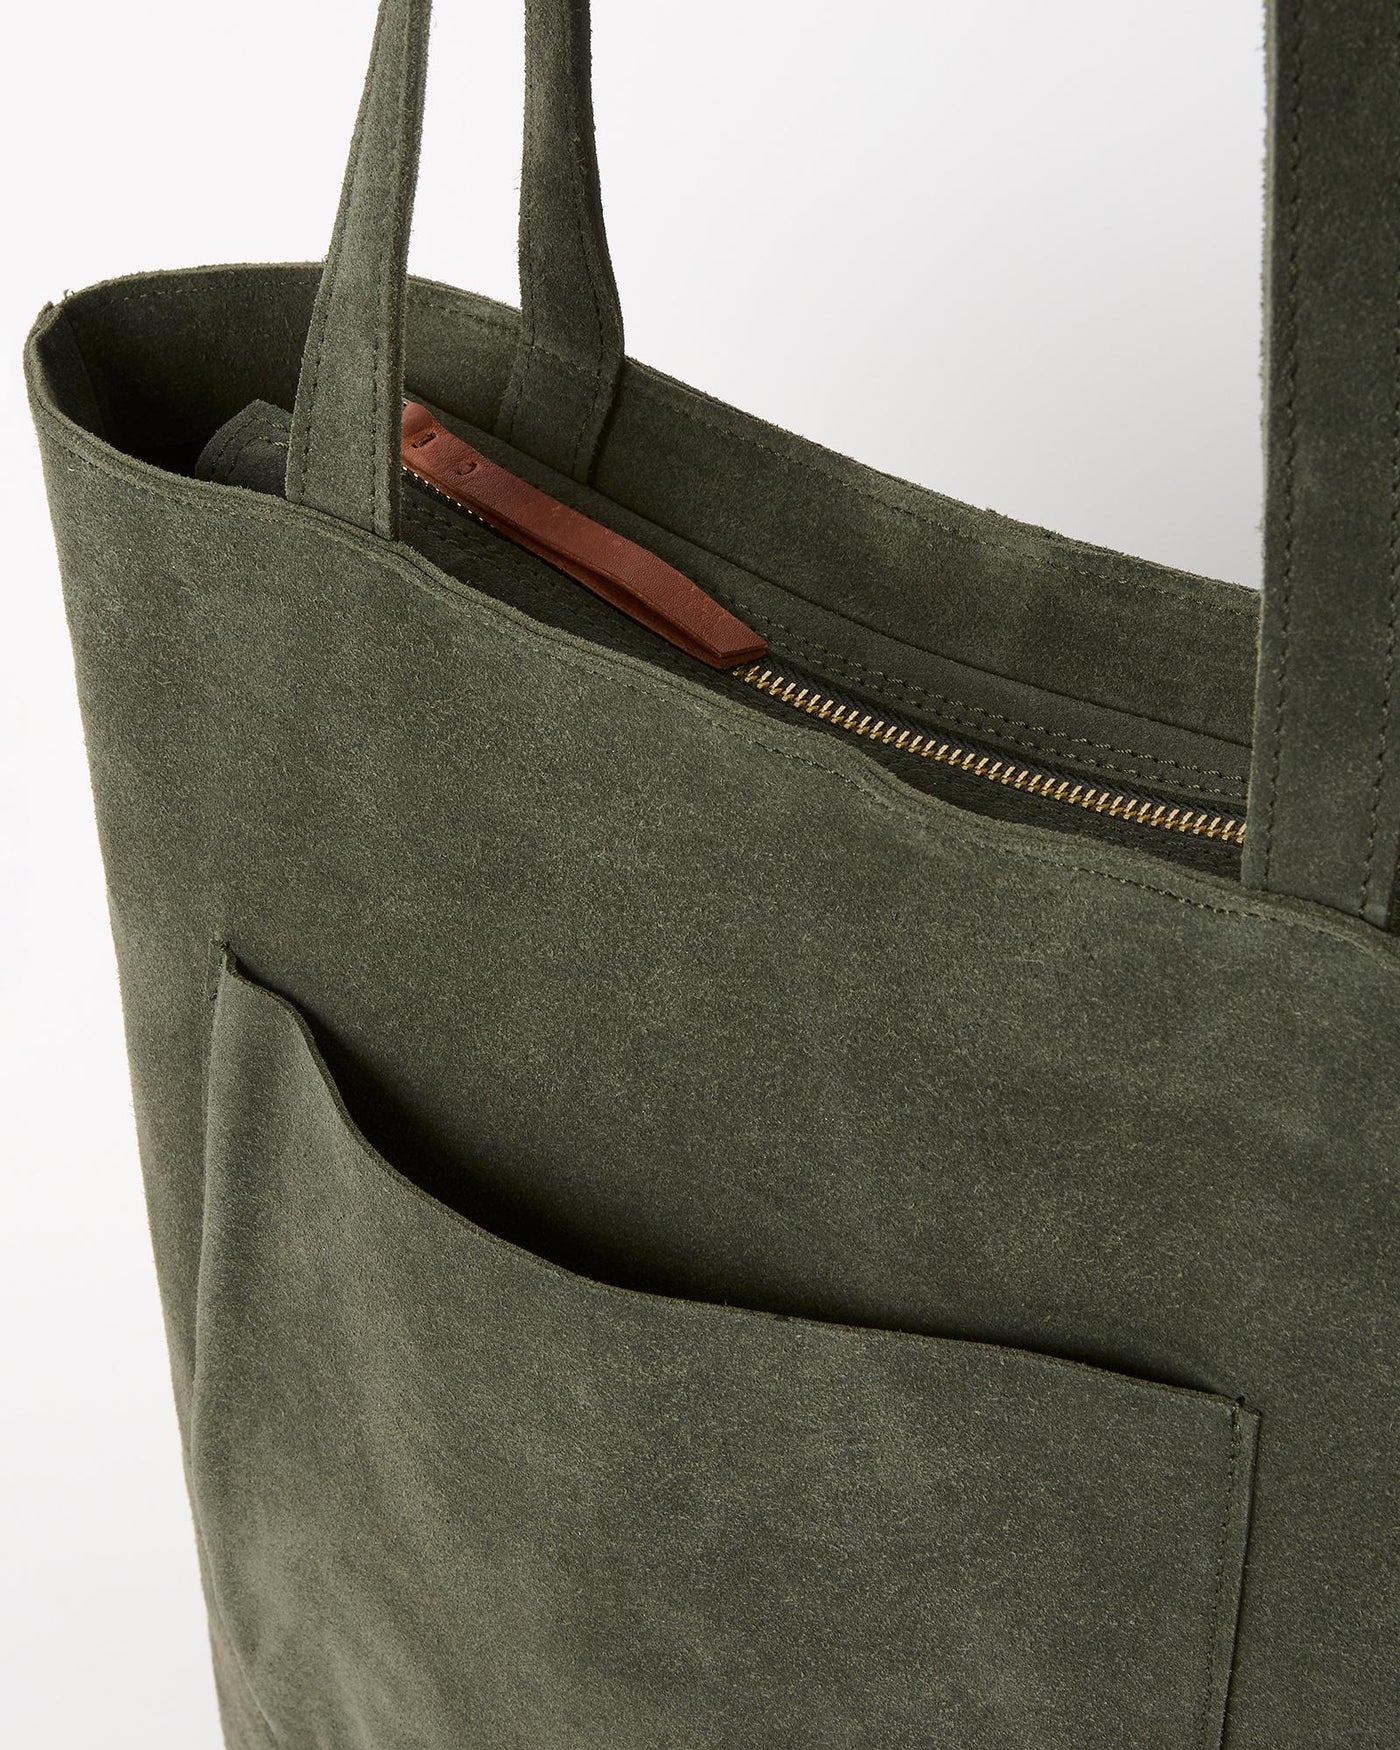 Suede Everyday Tote Olive